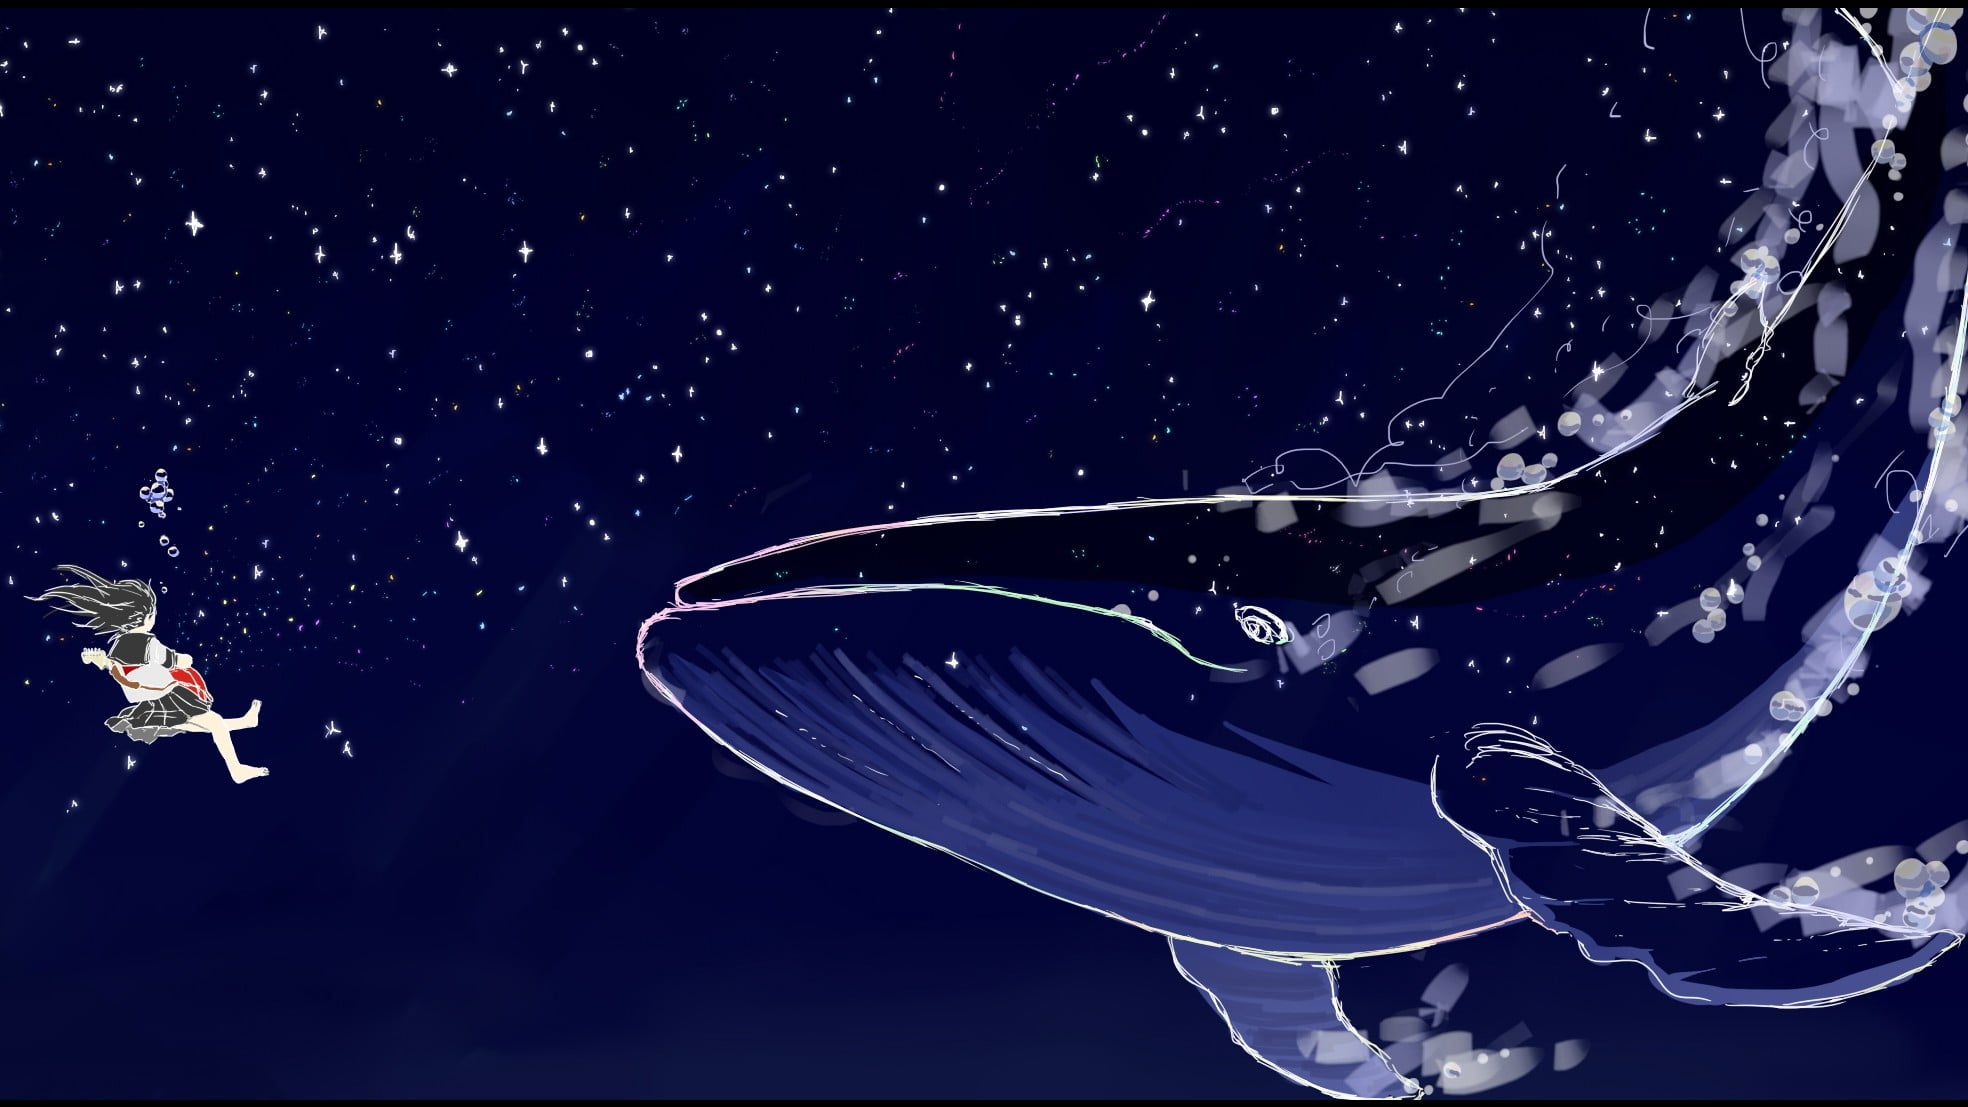 illustration of whale, whale, stars, underwater